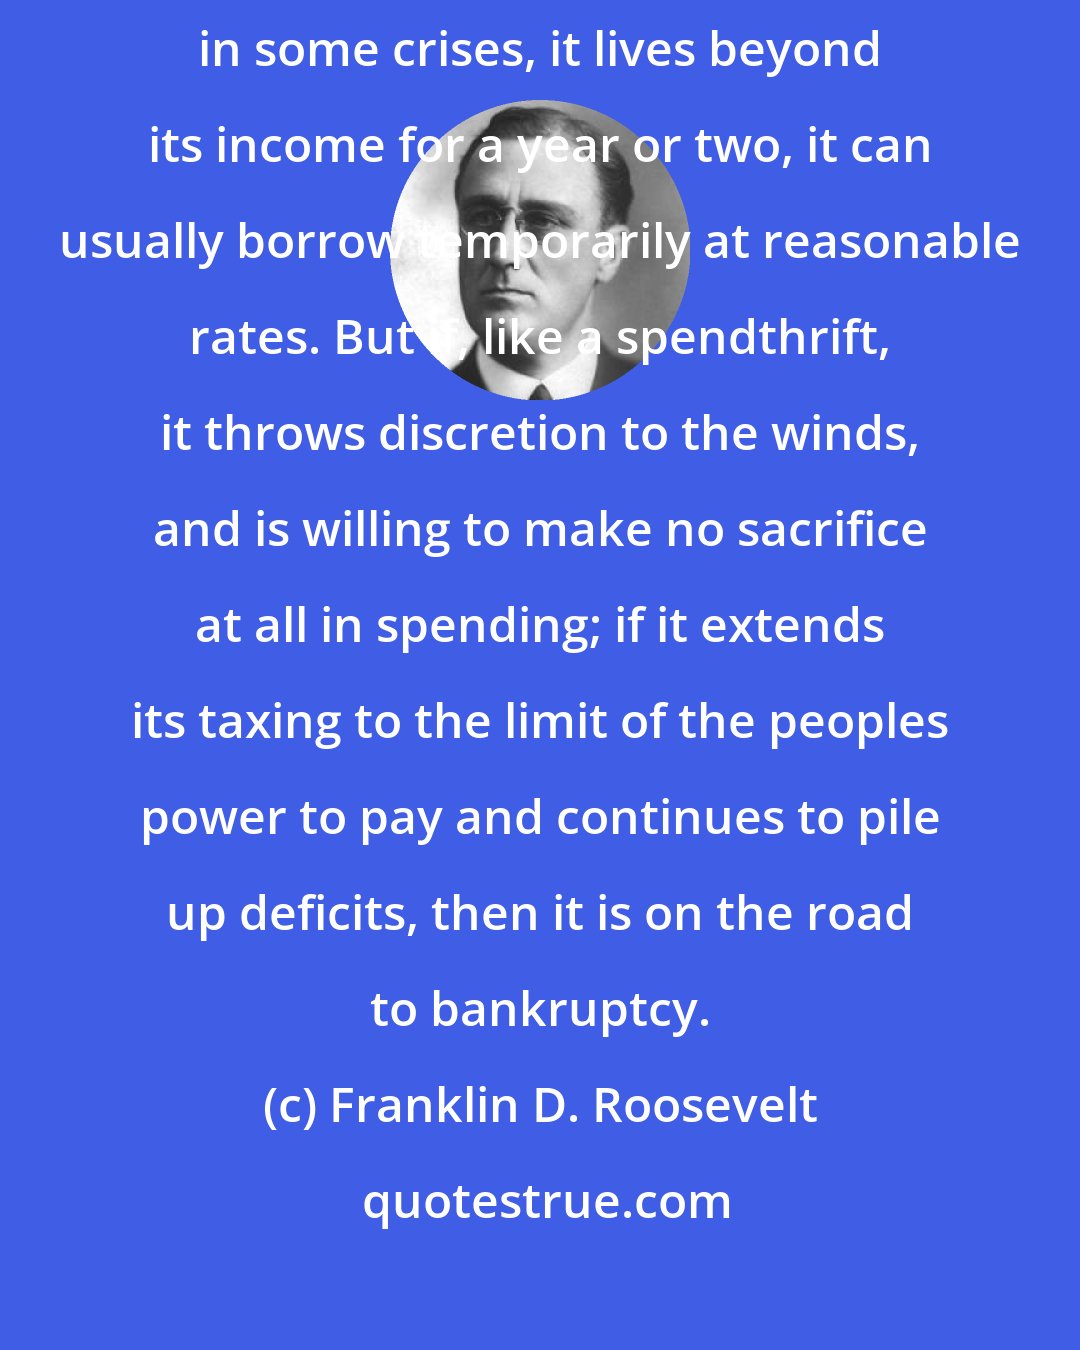 Franklin D. Roosevelt: If the Nation is living within its income, its credit is good. If, in some crises, it lives beyond its income for a year or two, it can usually borrow temporarily at reasonable rates. But if, like a spendthrift, it throws discretion to the winds, and is willing to make no sacrifice at all in spending; if it extends its taxing to the limit of the peoples power to pay and continues to pile up deficits, then it is on the road to bankruptcy.